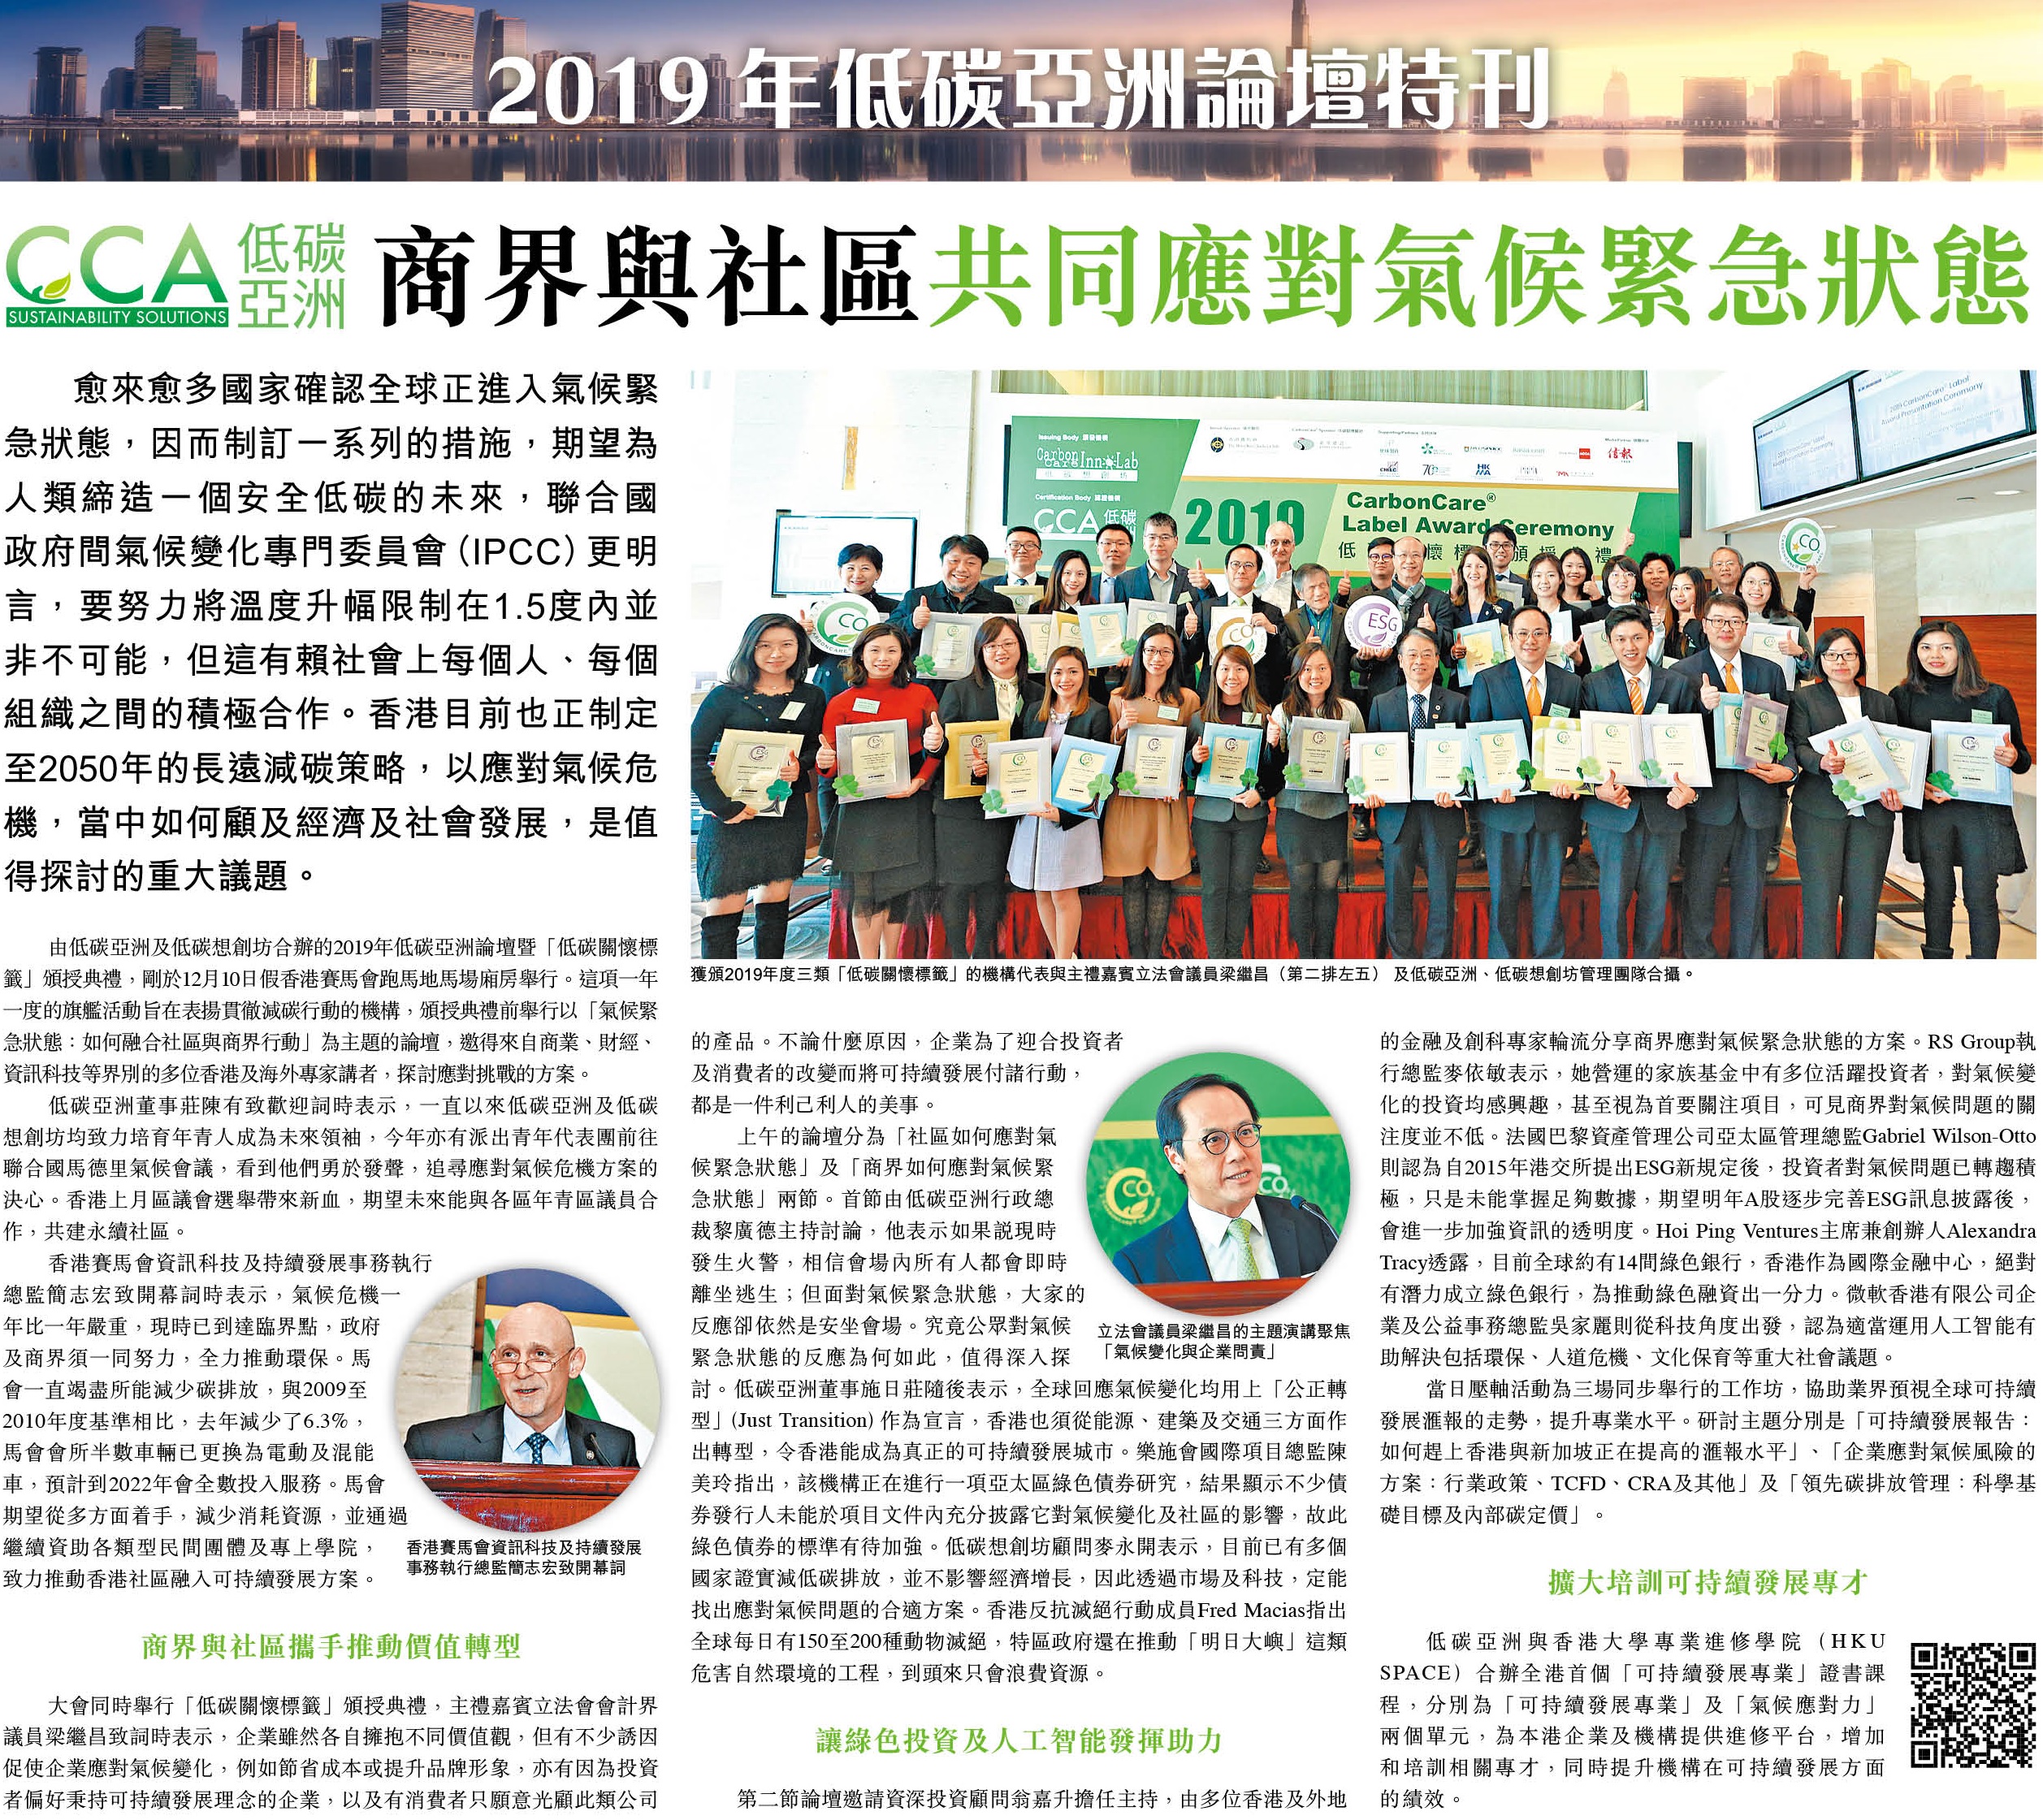 Cover Image for Hong Kong Economic Journal -
		CarbonCare® Conference 2019 Special Supplement 